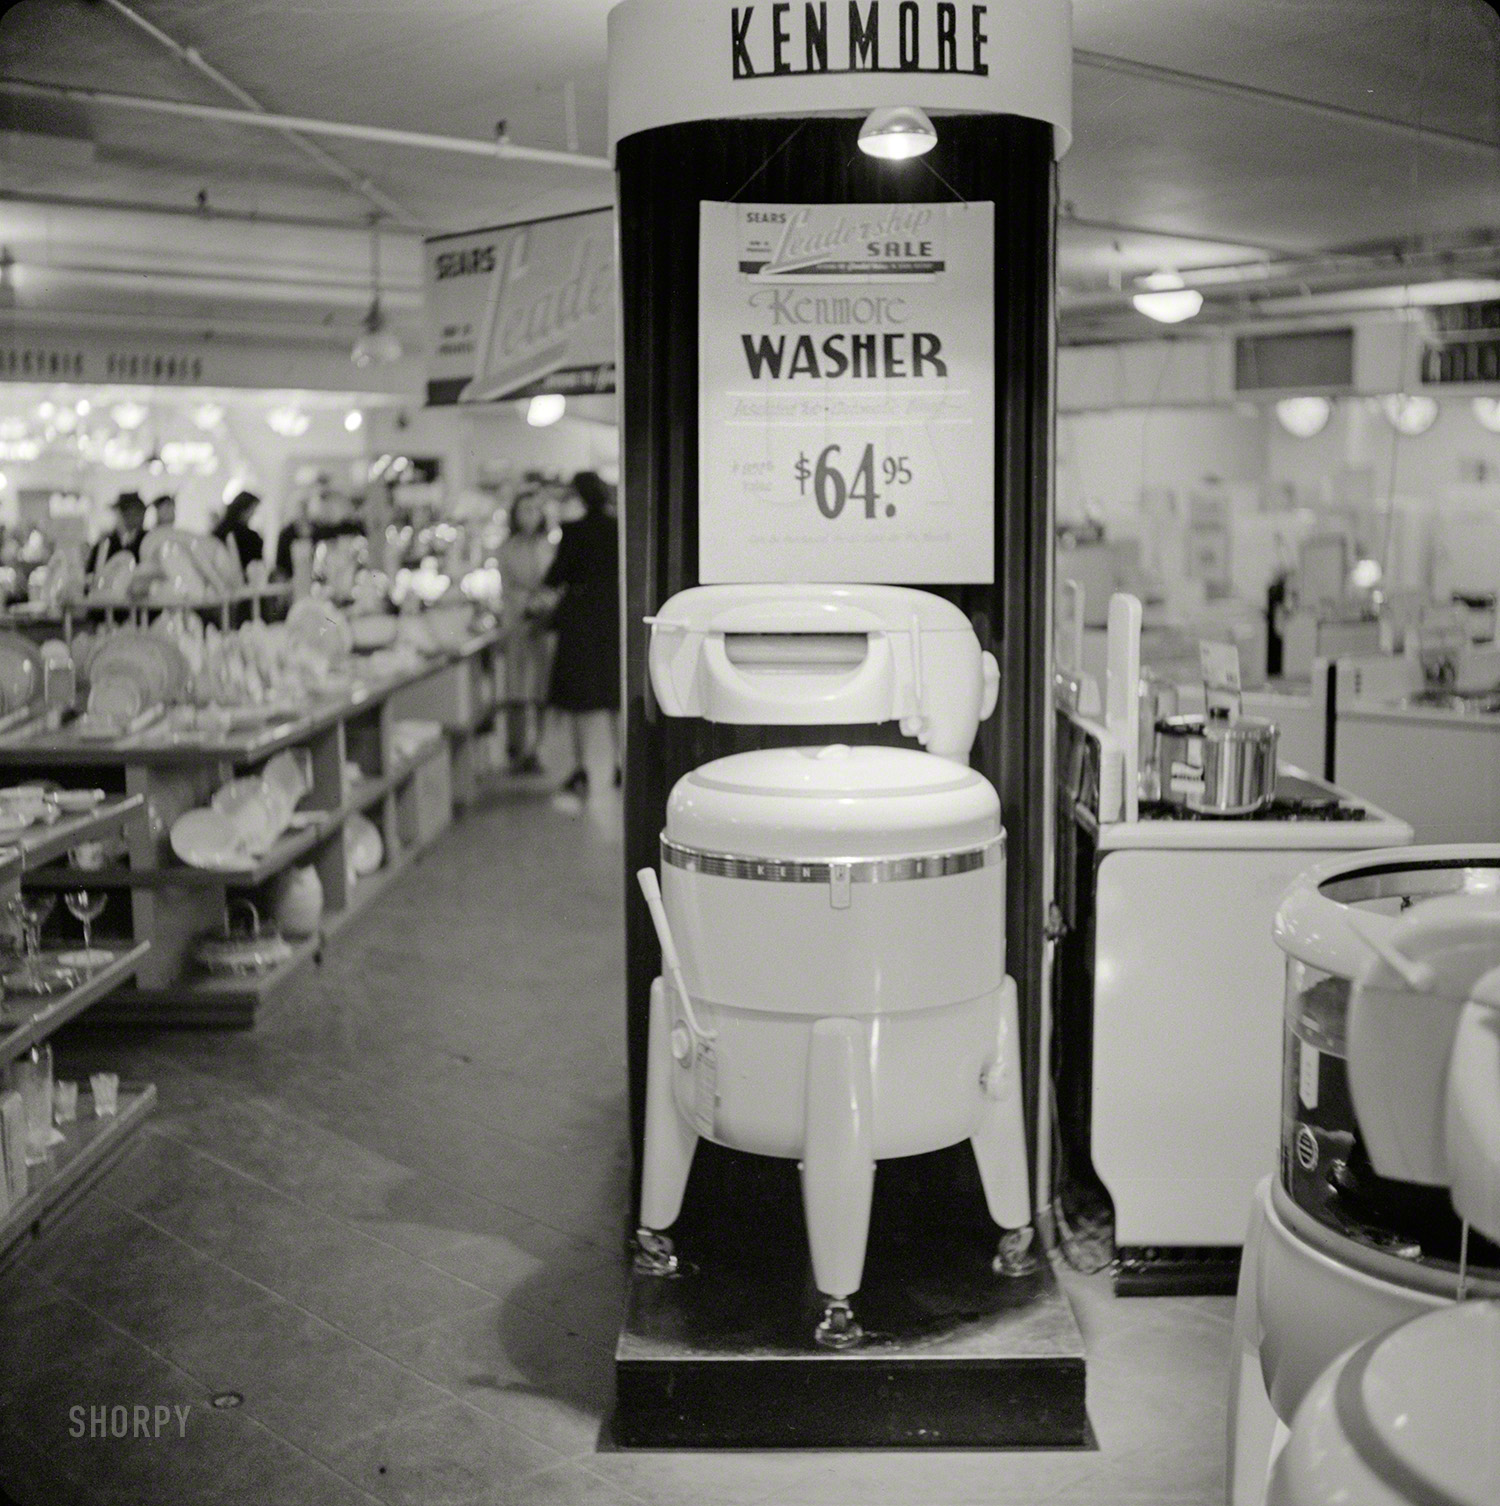 &nbsp; &nbsp; &nbsp; &nbsp; Its big 8-sheet porcelain tub is insulated to keep water warm! Streamlined 8-position wringer with soft balloon rolls has chromium pressure controls; push-pull safety release; roll-stop safety dry feed rest and automatic water-return board.
October 1941. "Kenmore washer for sale. Sears Roebuck store at Syracuse, New York." Medium format negative by John Collier. View full size.